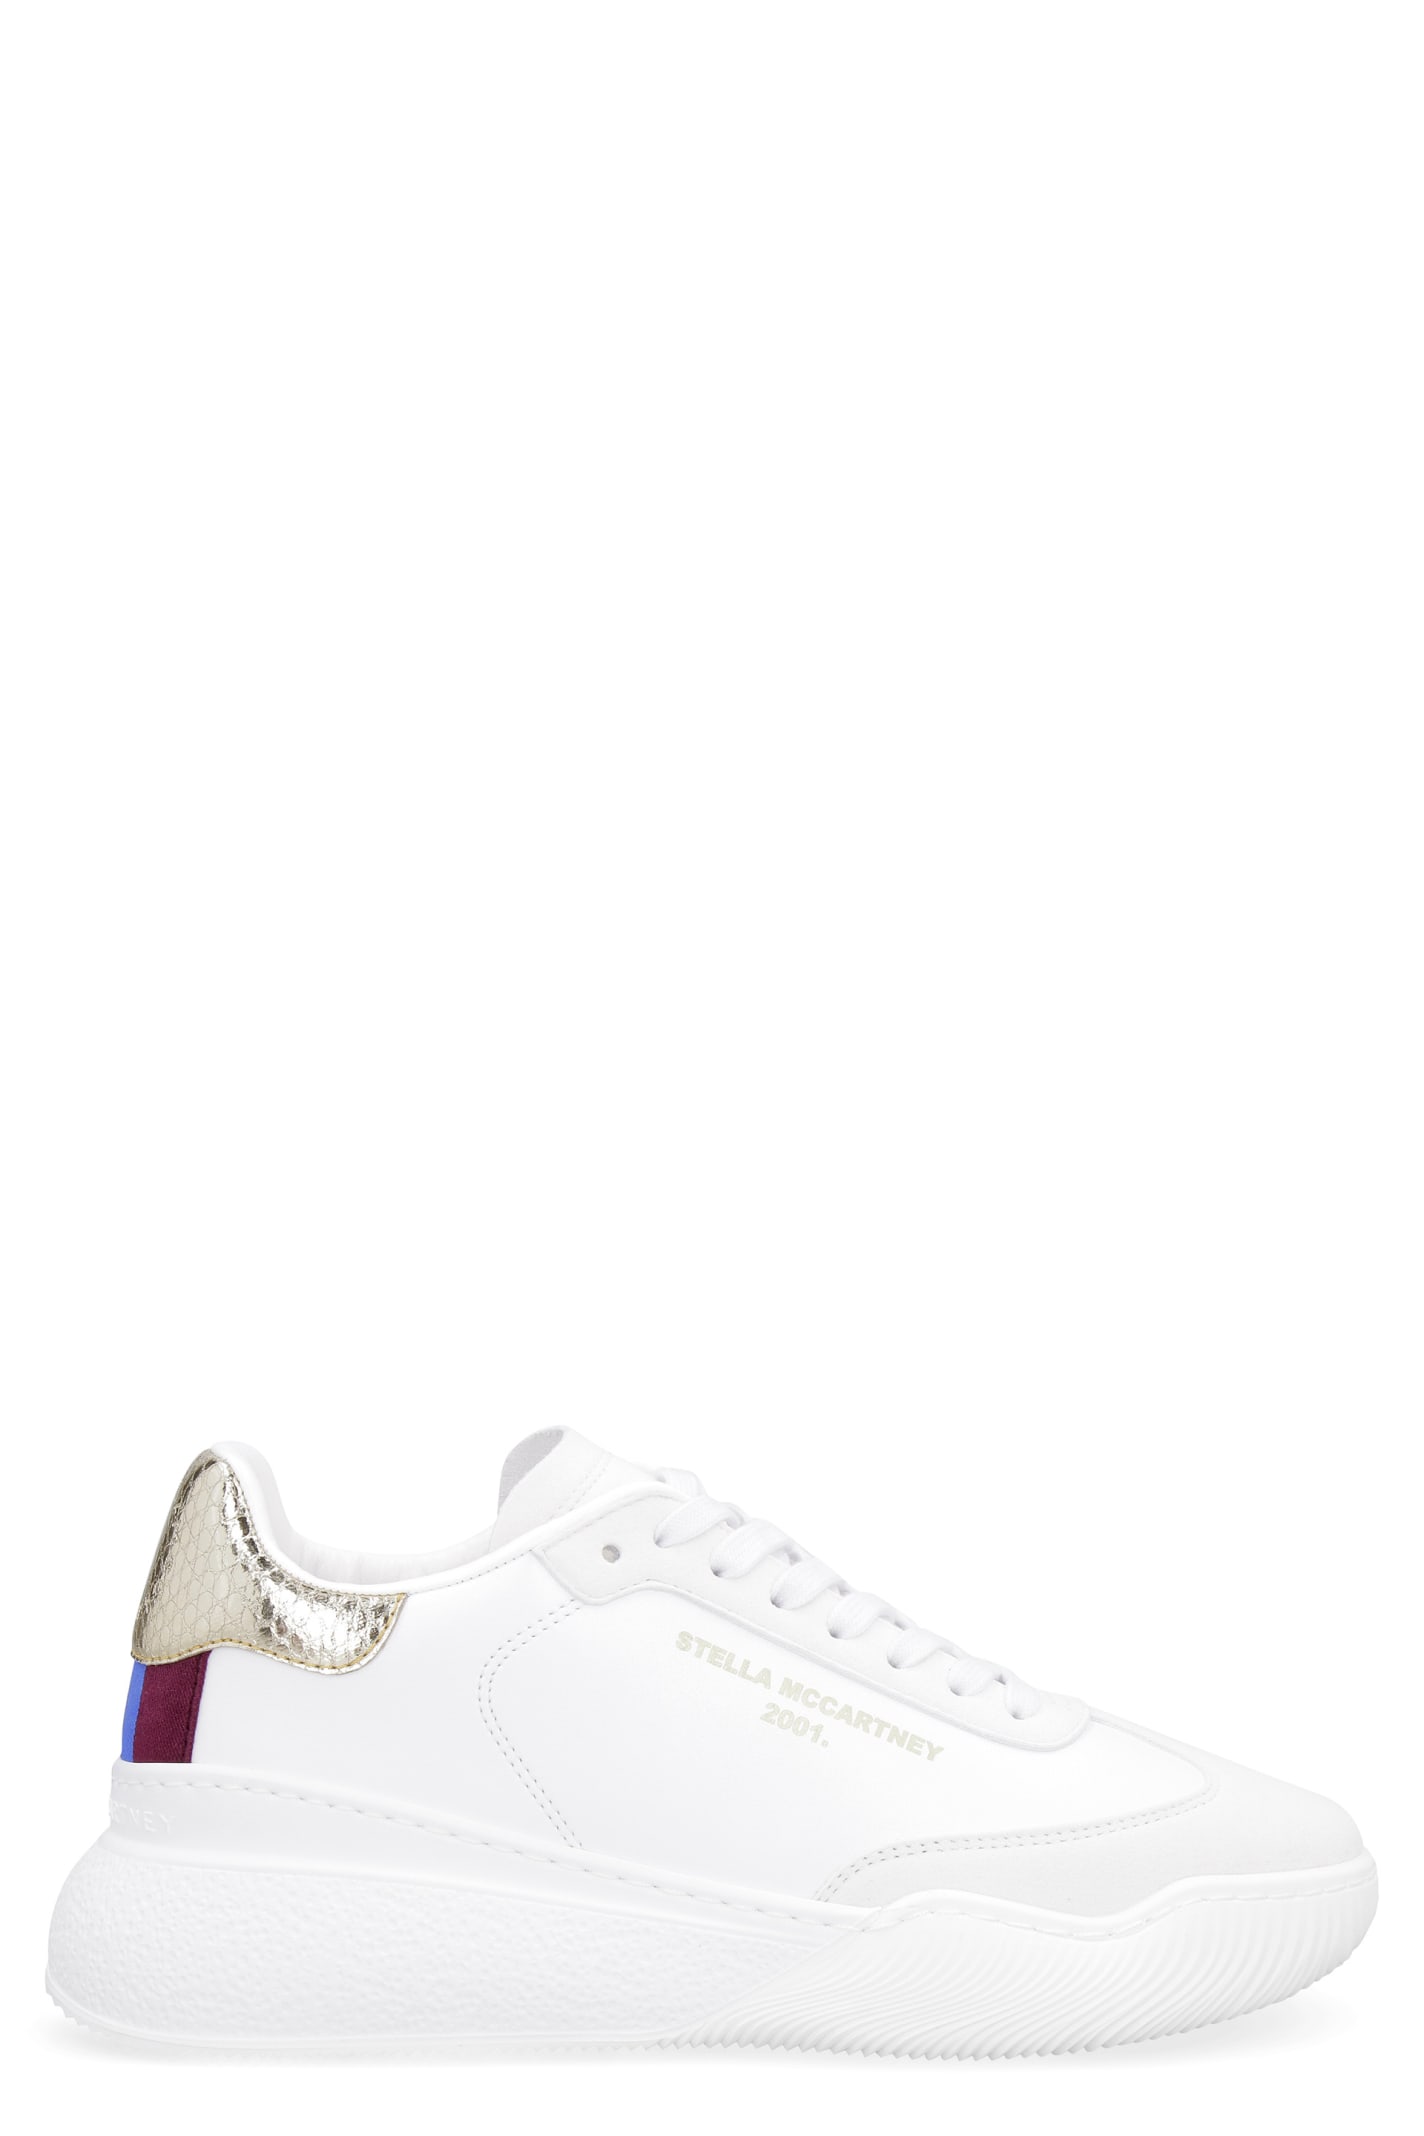 Buy Stella McCartney Loop Low-top Sneakers online, shop Stella McCartney shoes with free shipping